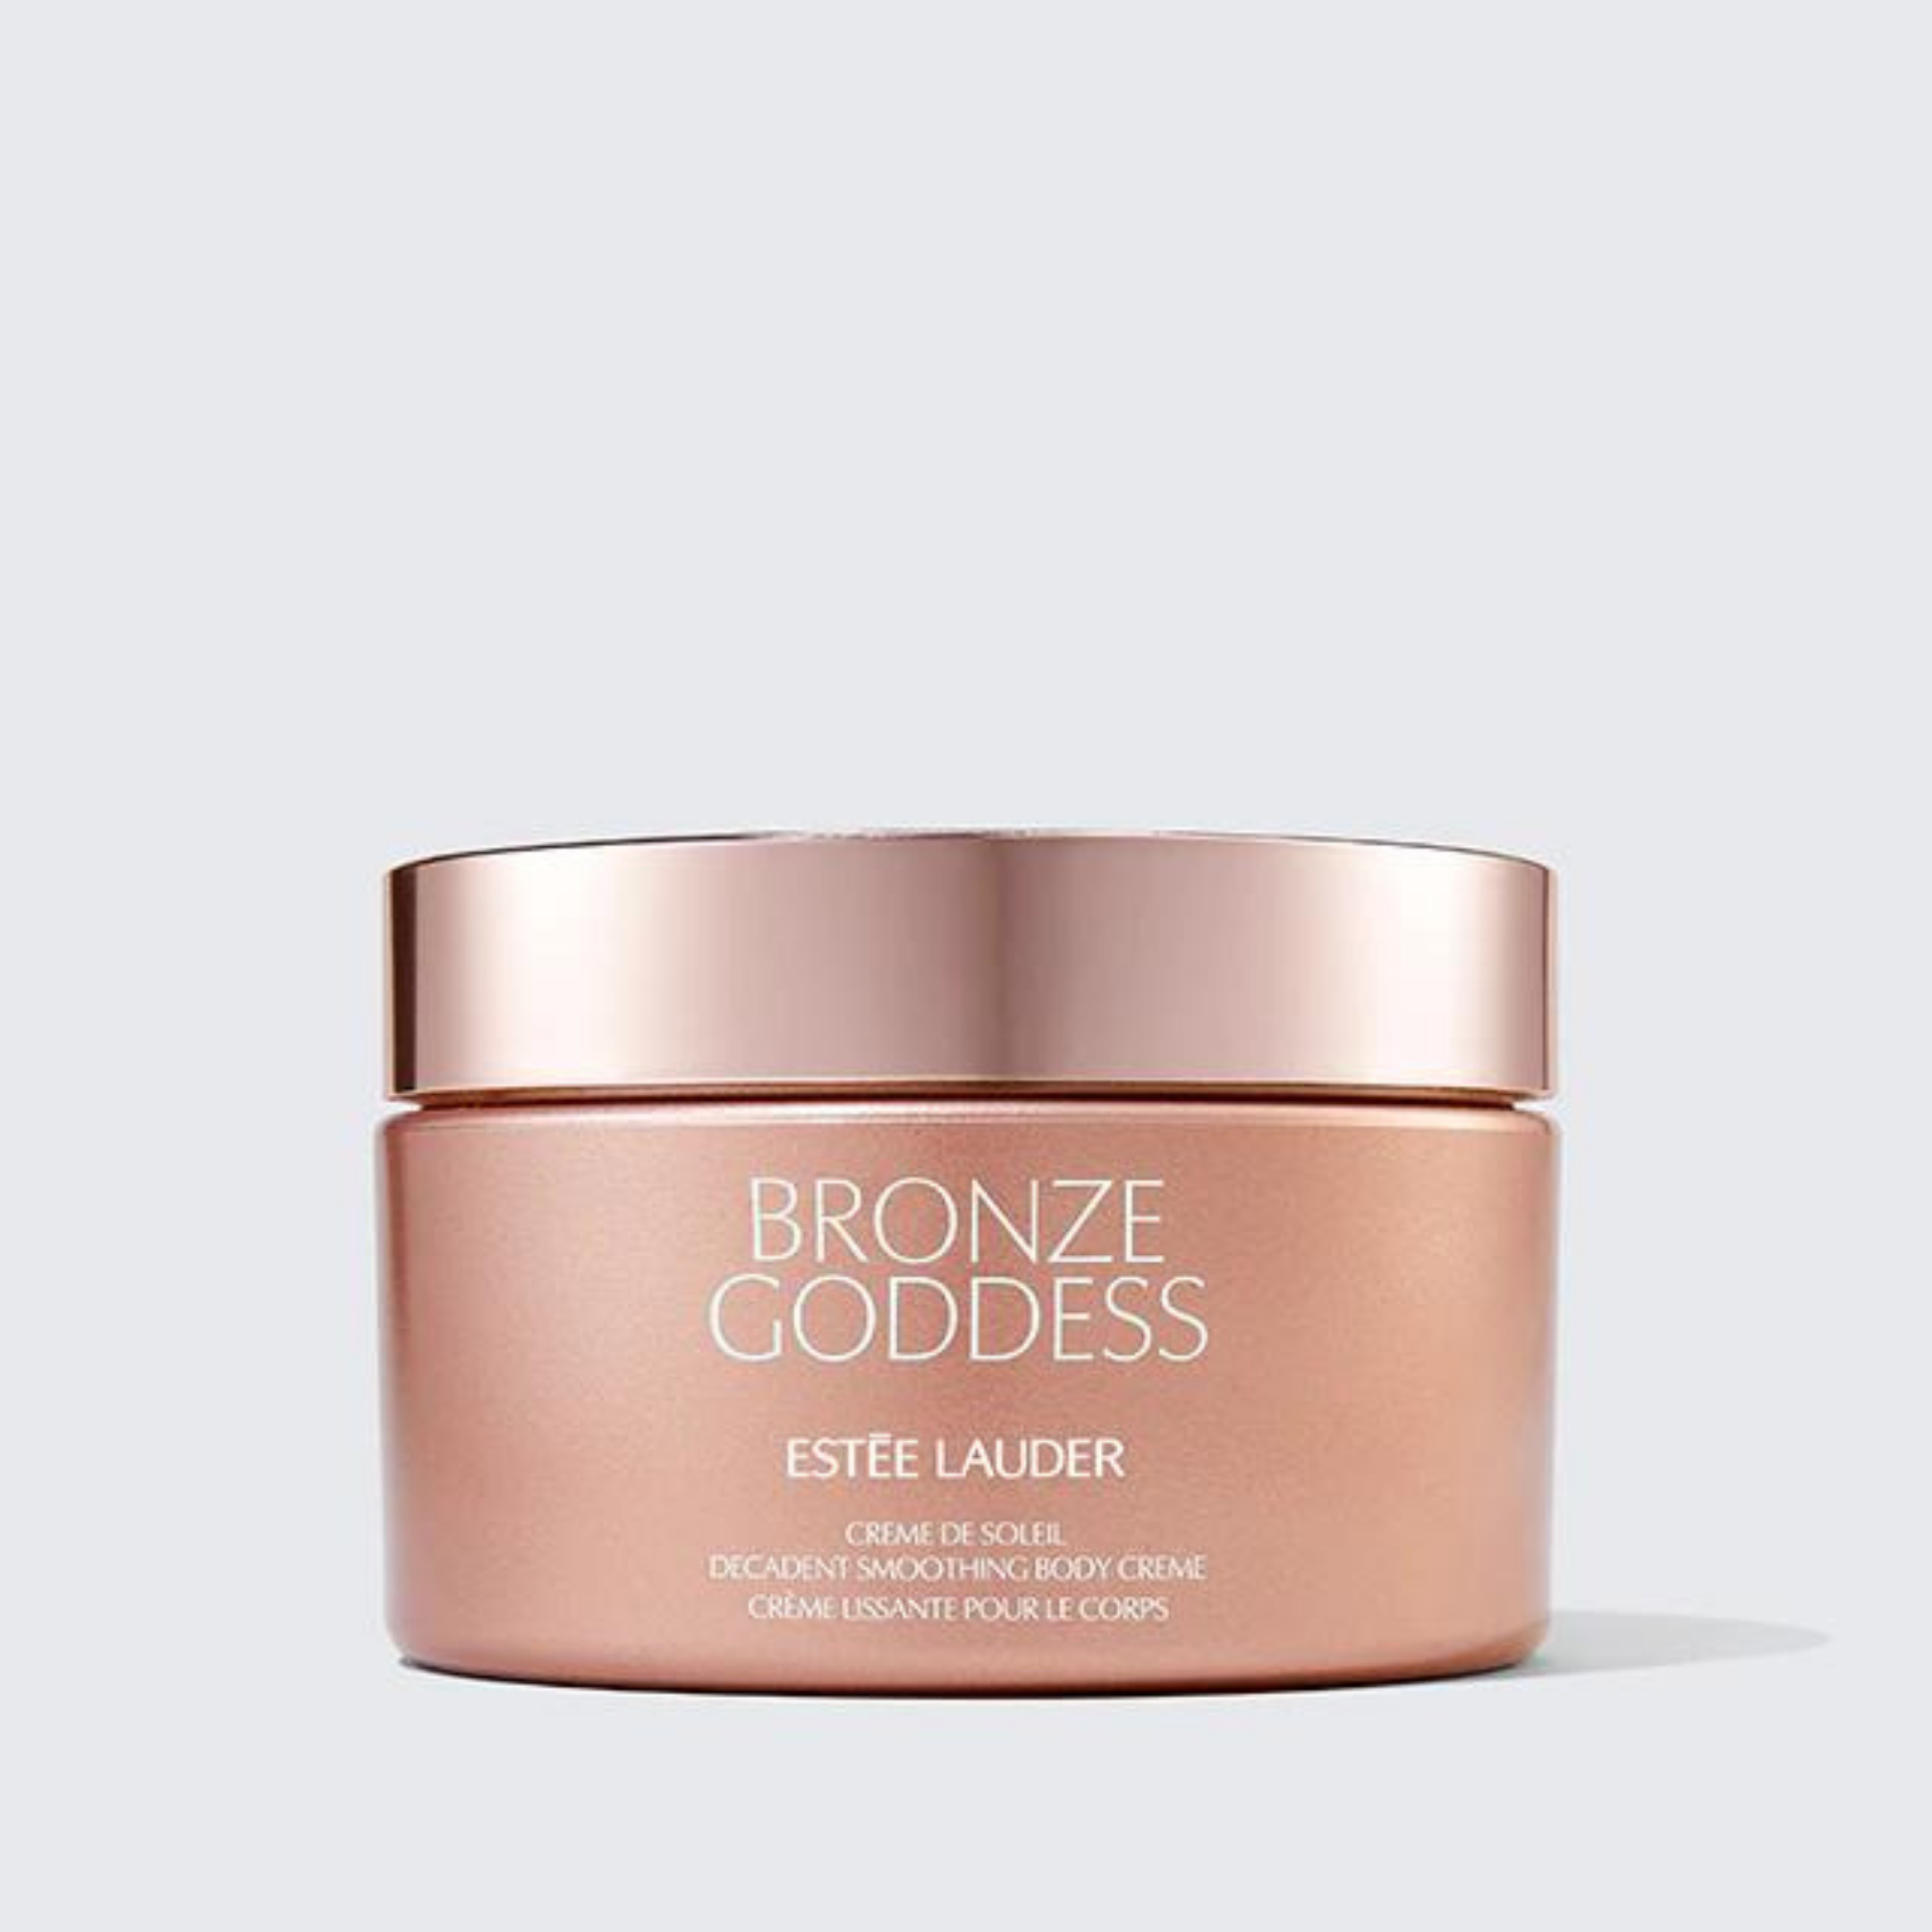 It's A Sunkissed Summer – 9 Body Bronzers To Try For The Ultimate Glow